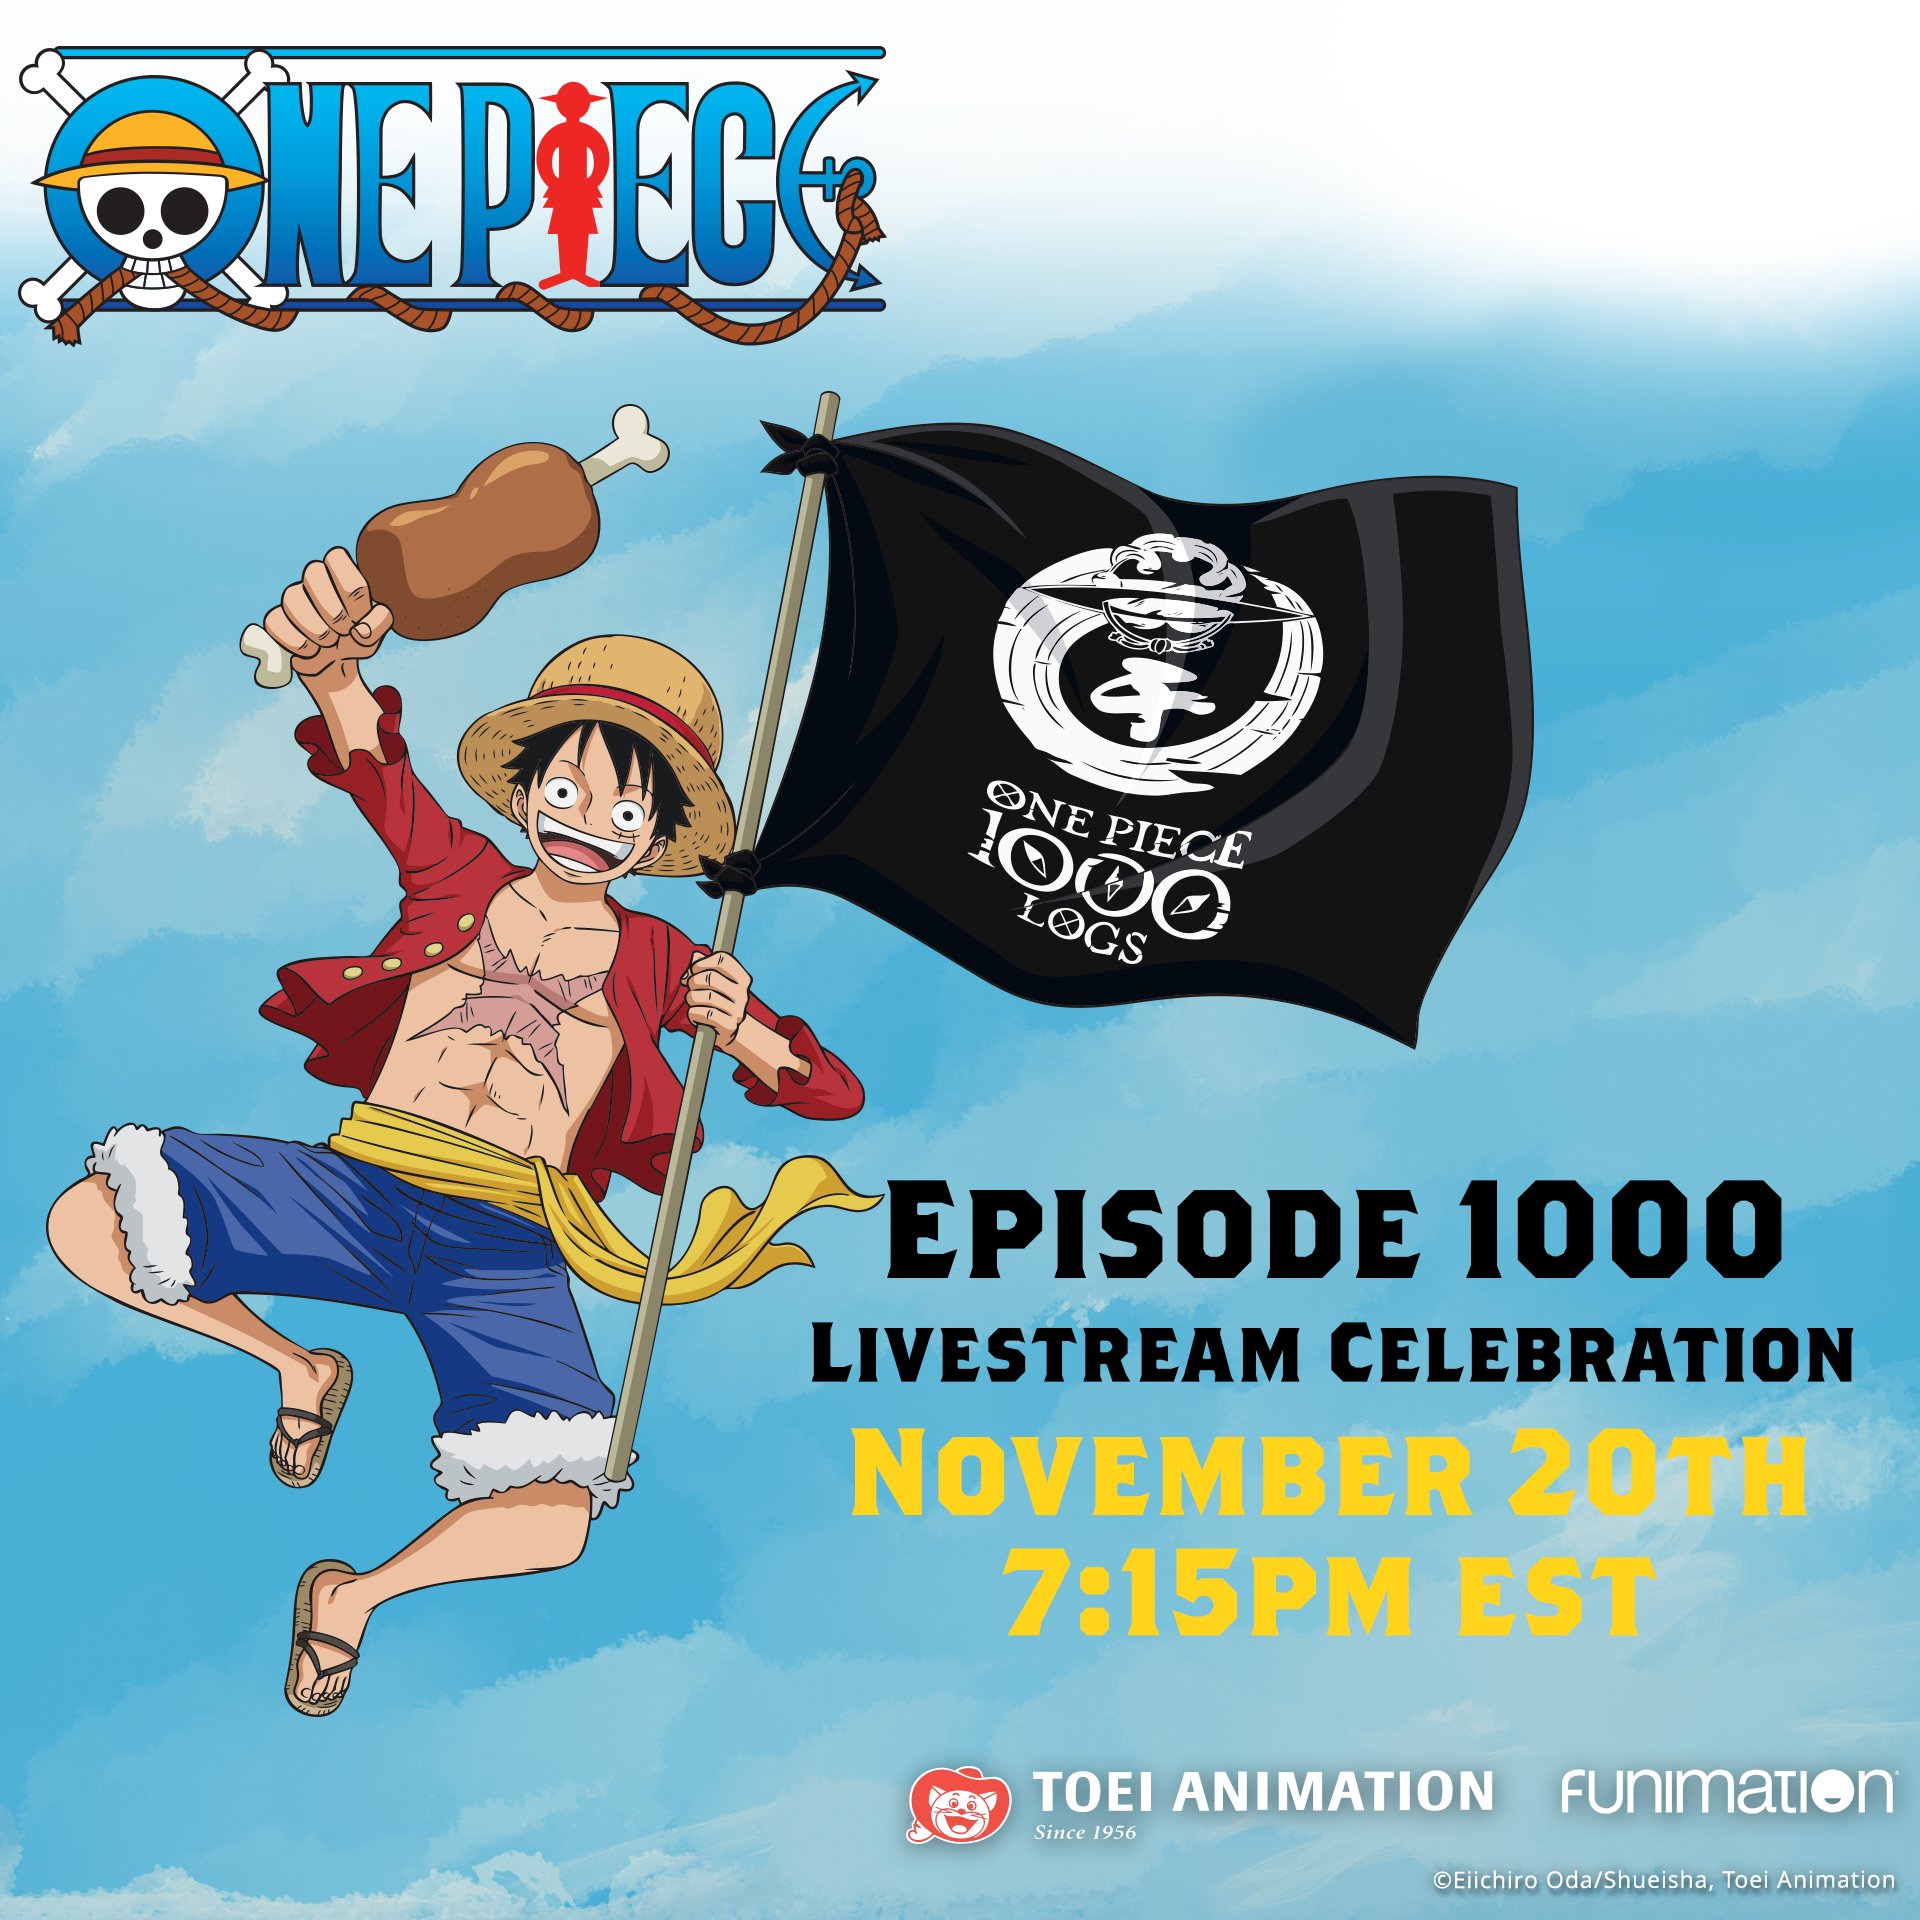 Will One Piece Episode 1000 be special? Hype boils over as official Twitter  account further teases movie announcement